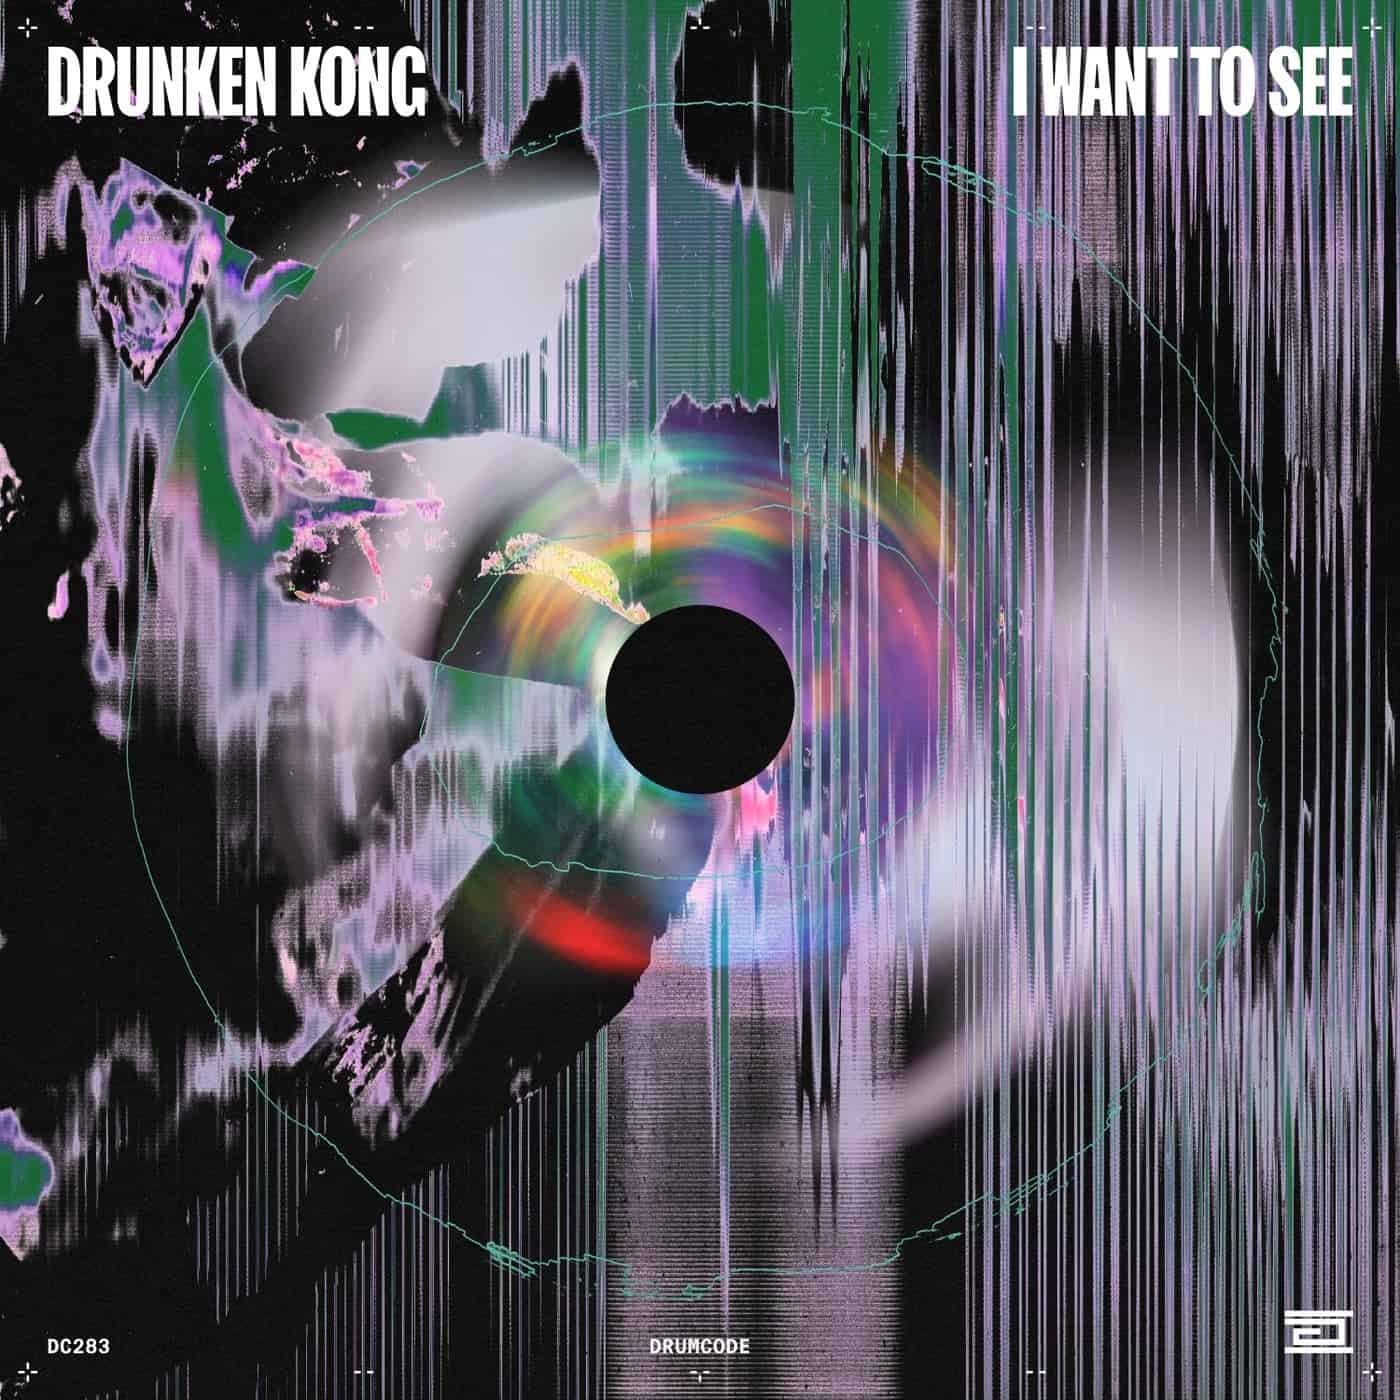 image cover: Drunken Kong - I Want to See / DC283